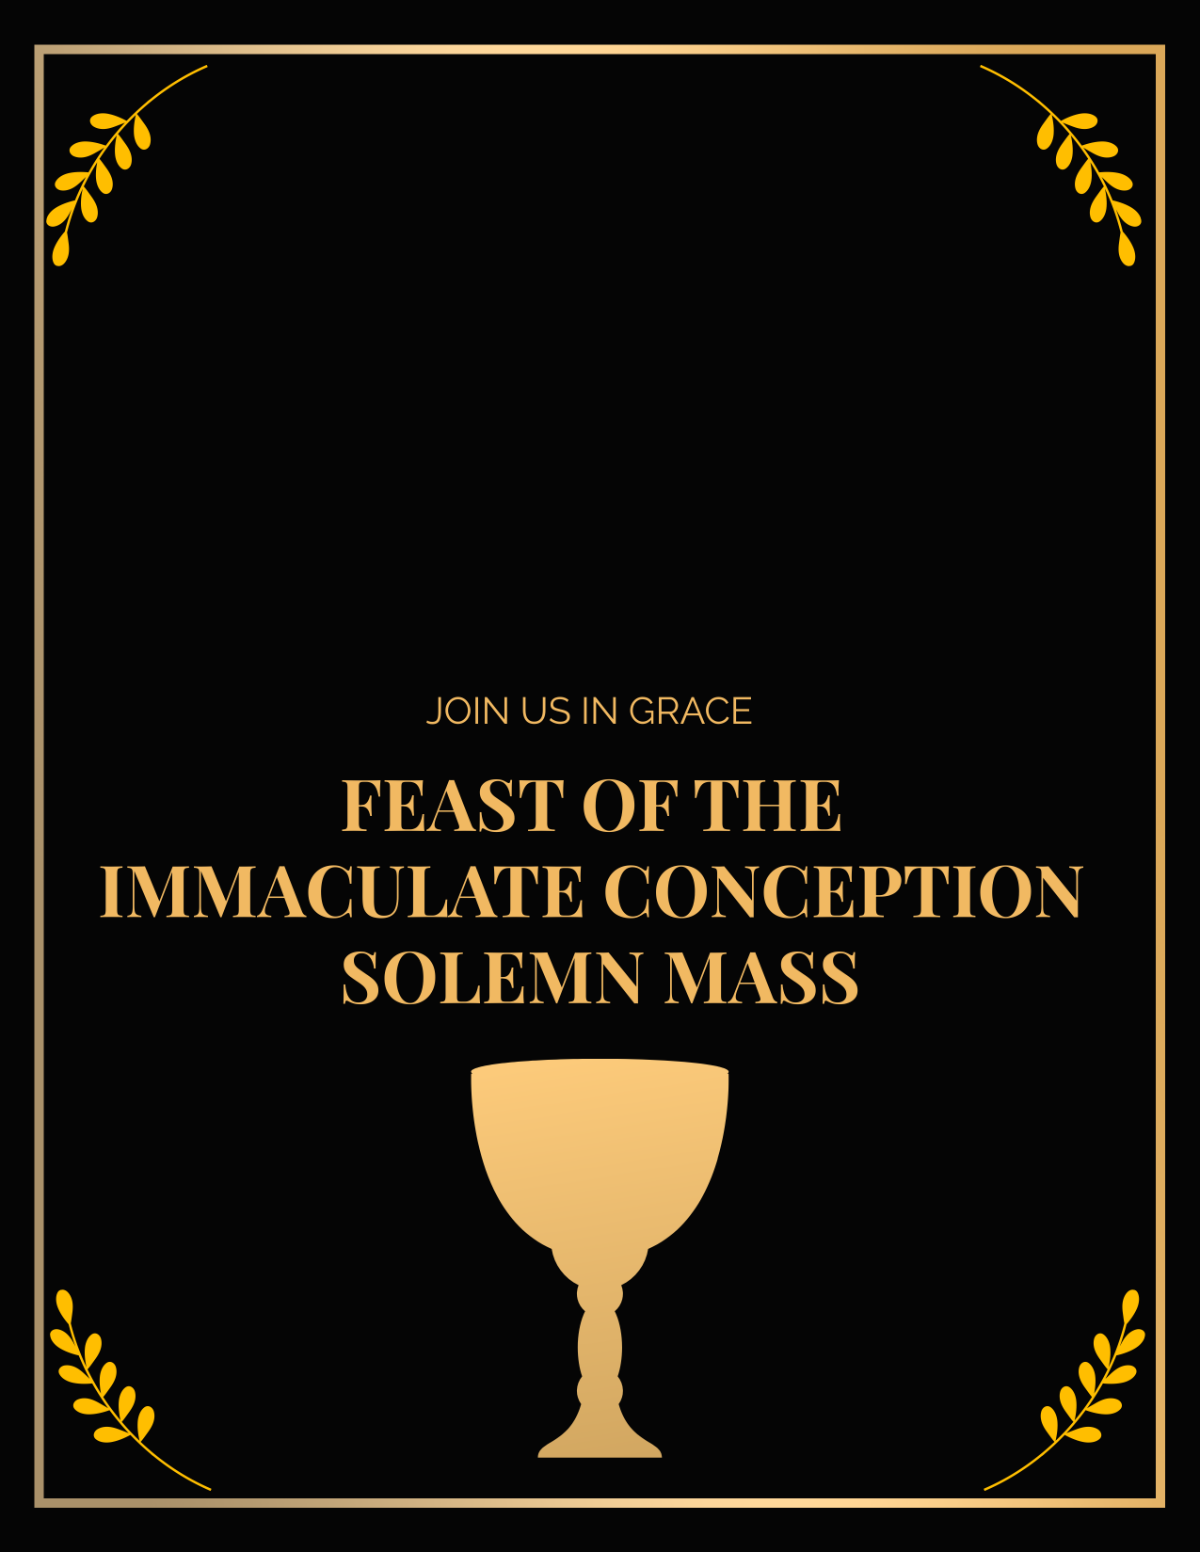 Feast of the Immaculate Conception Day Flyer